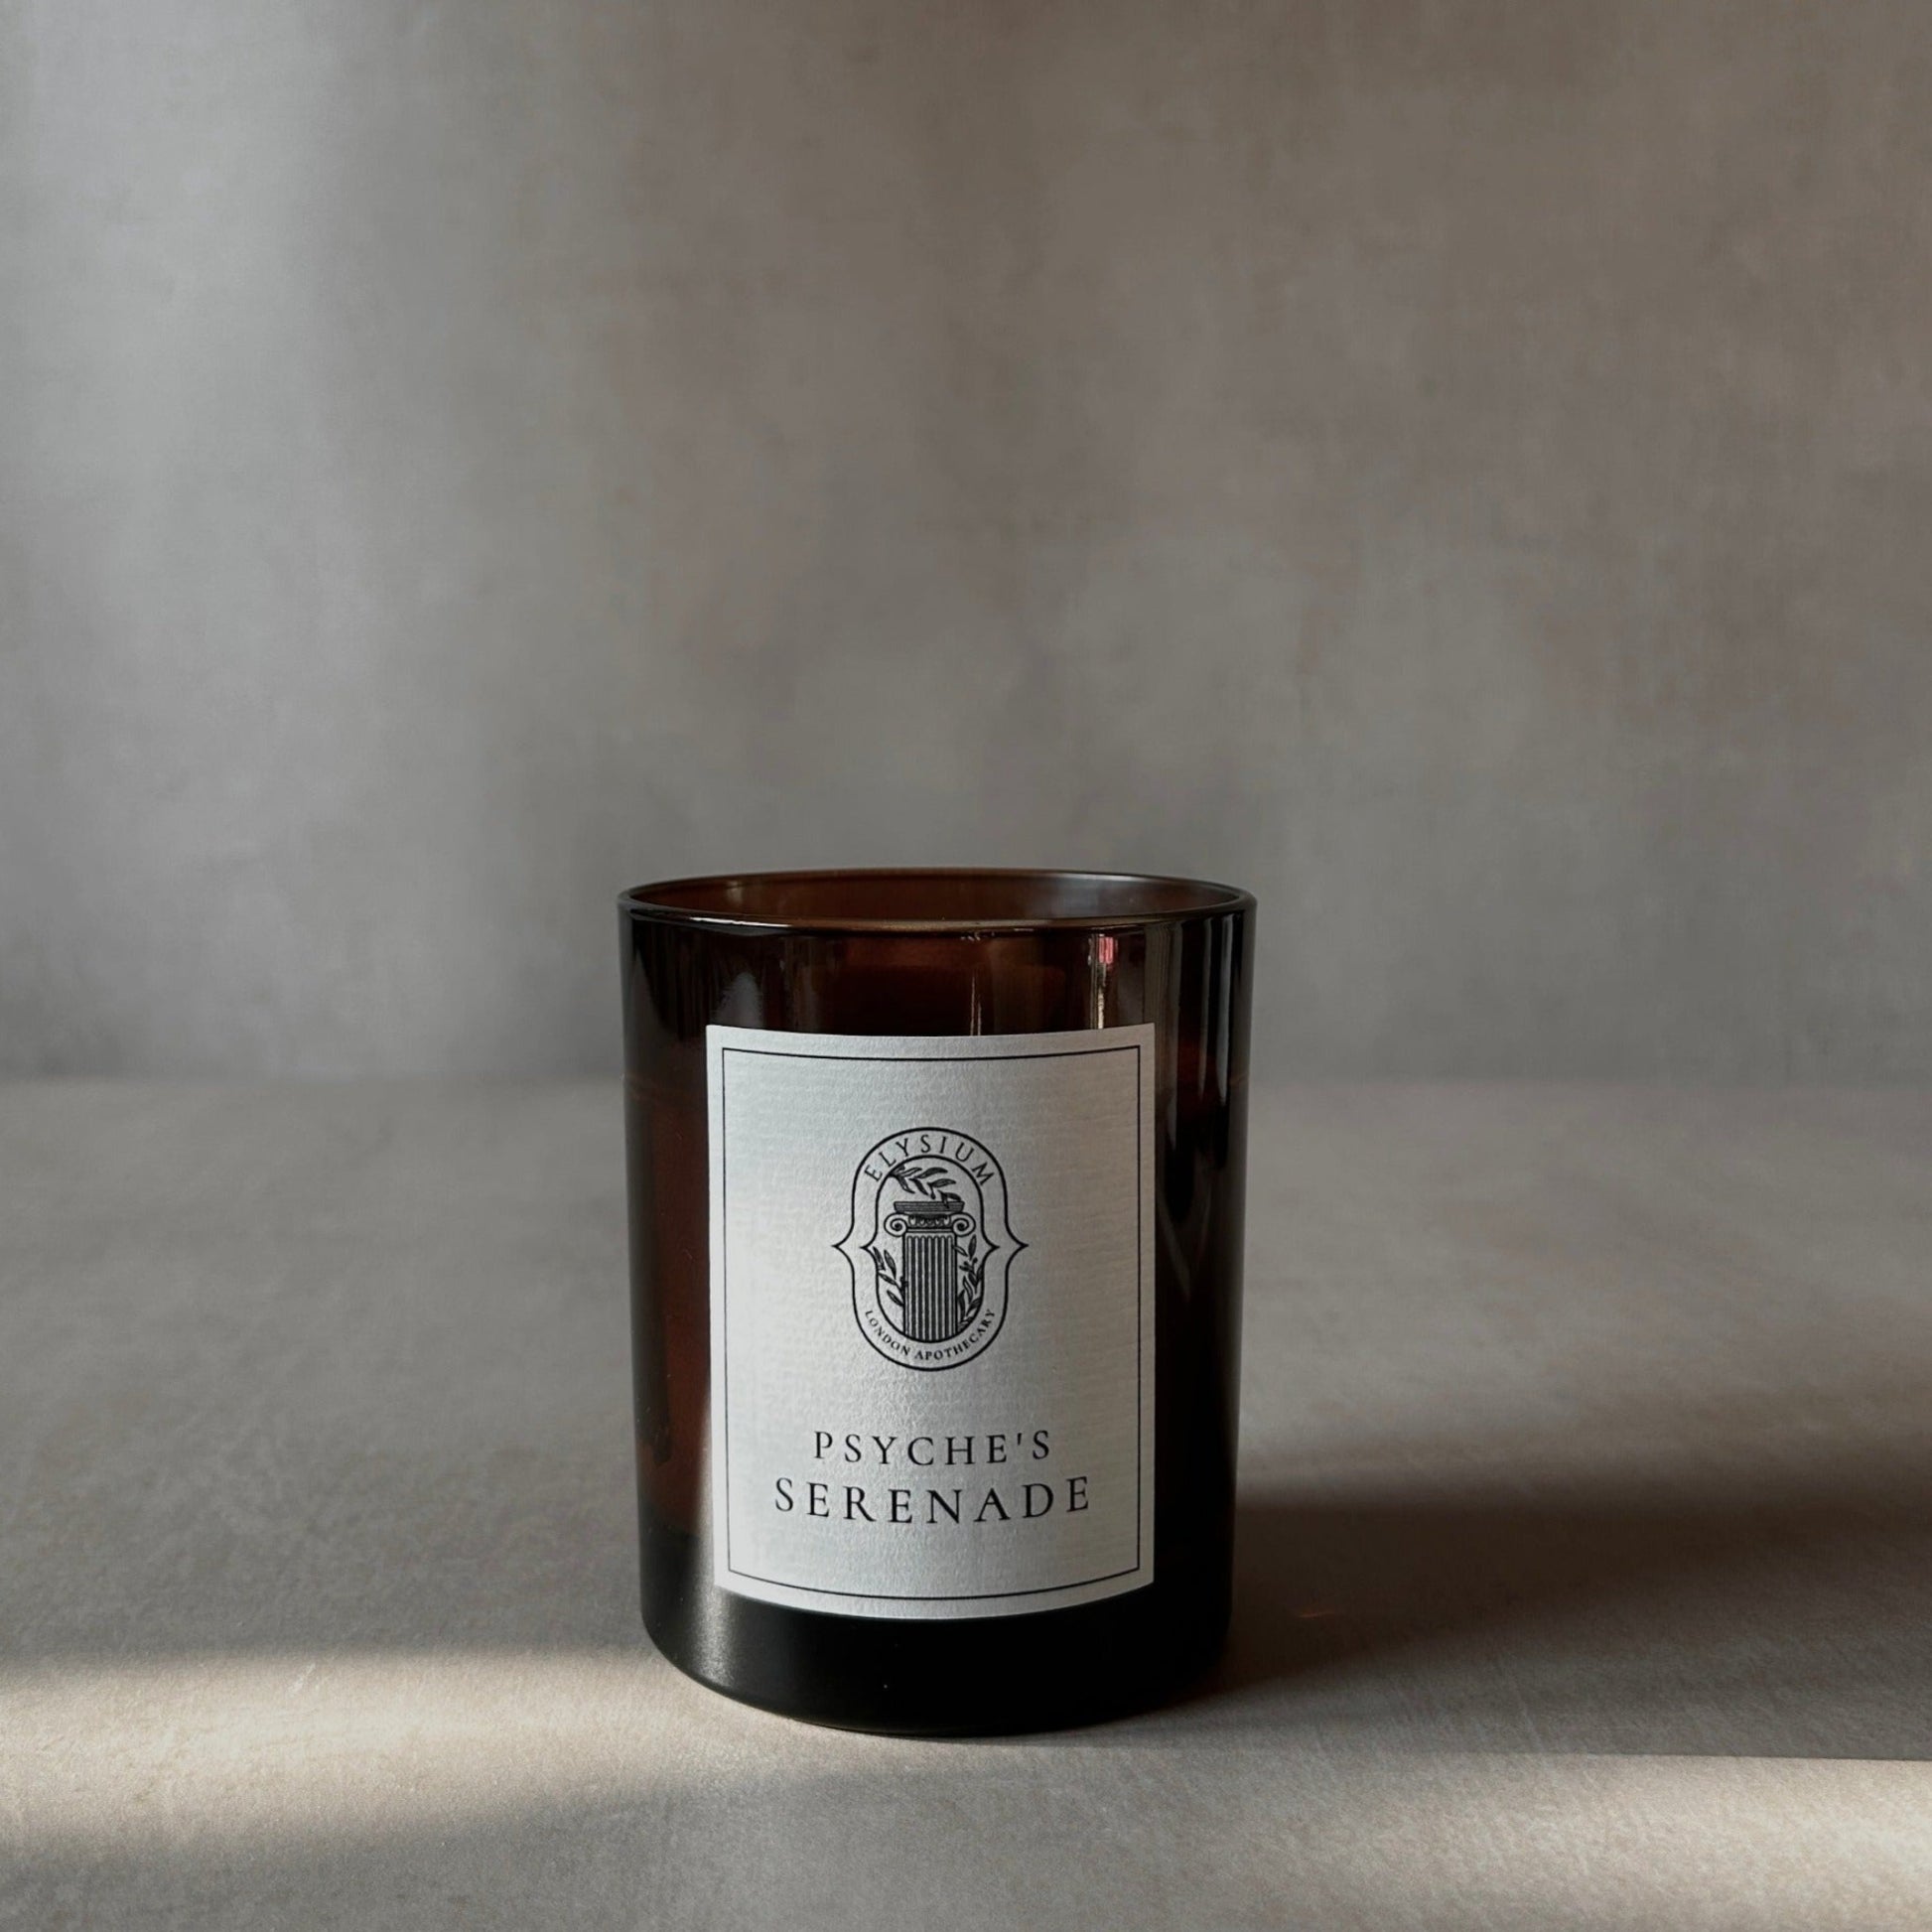 Psyche's Serenade Scented Candle